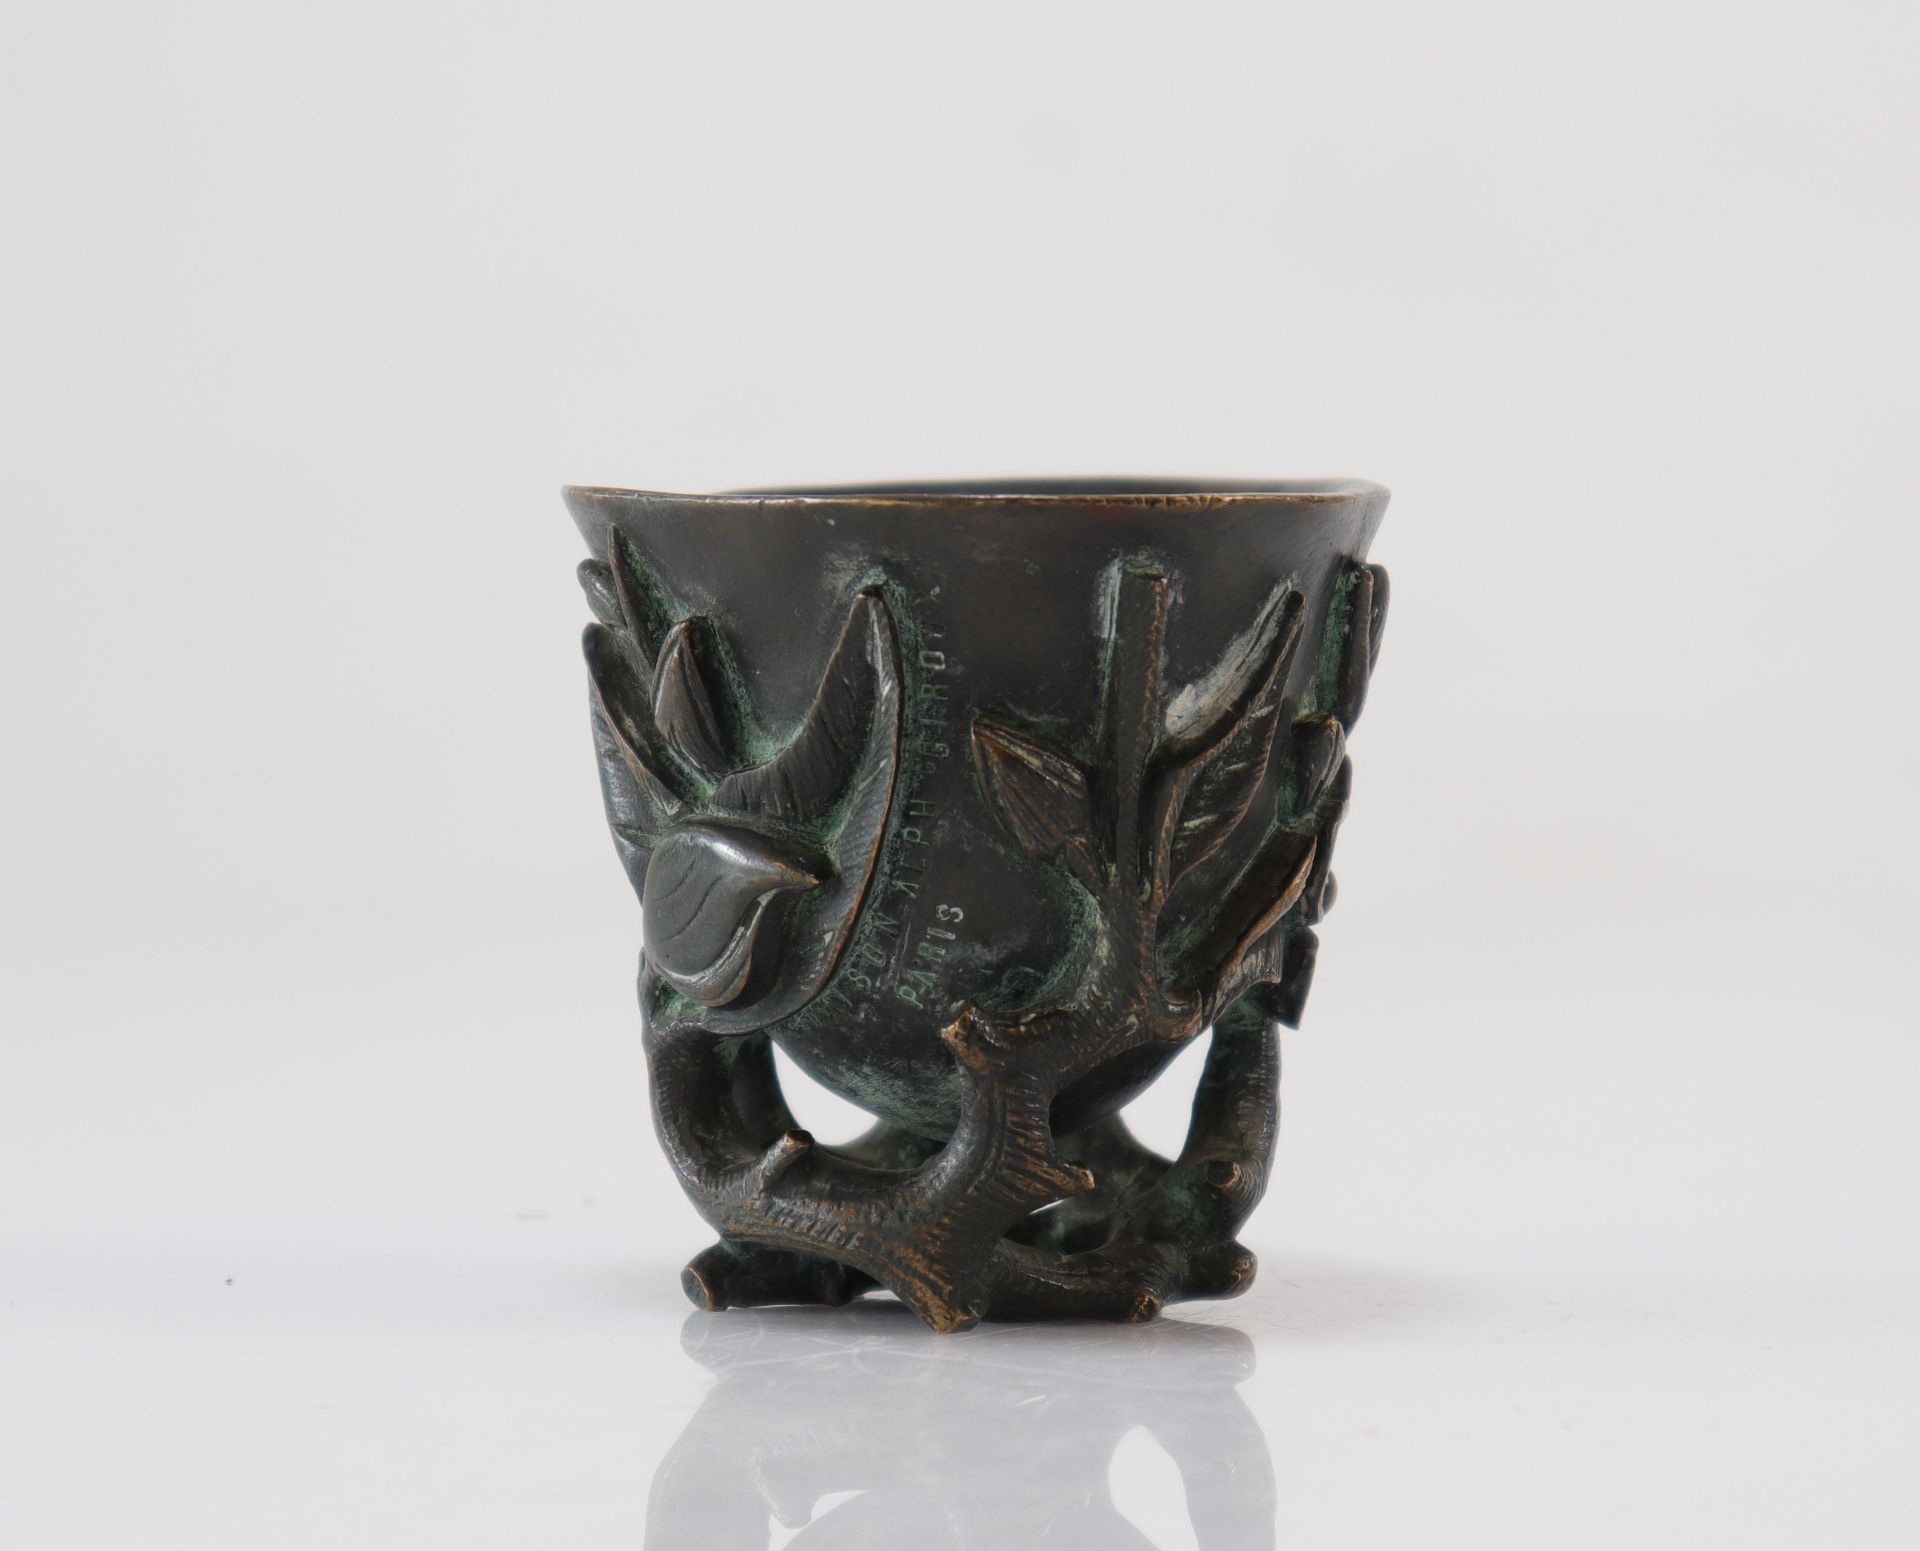 Chinese libation cup in 18th century bronze or earlier - Image 5 of 6